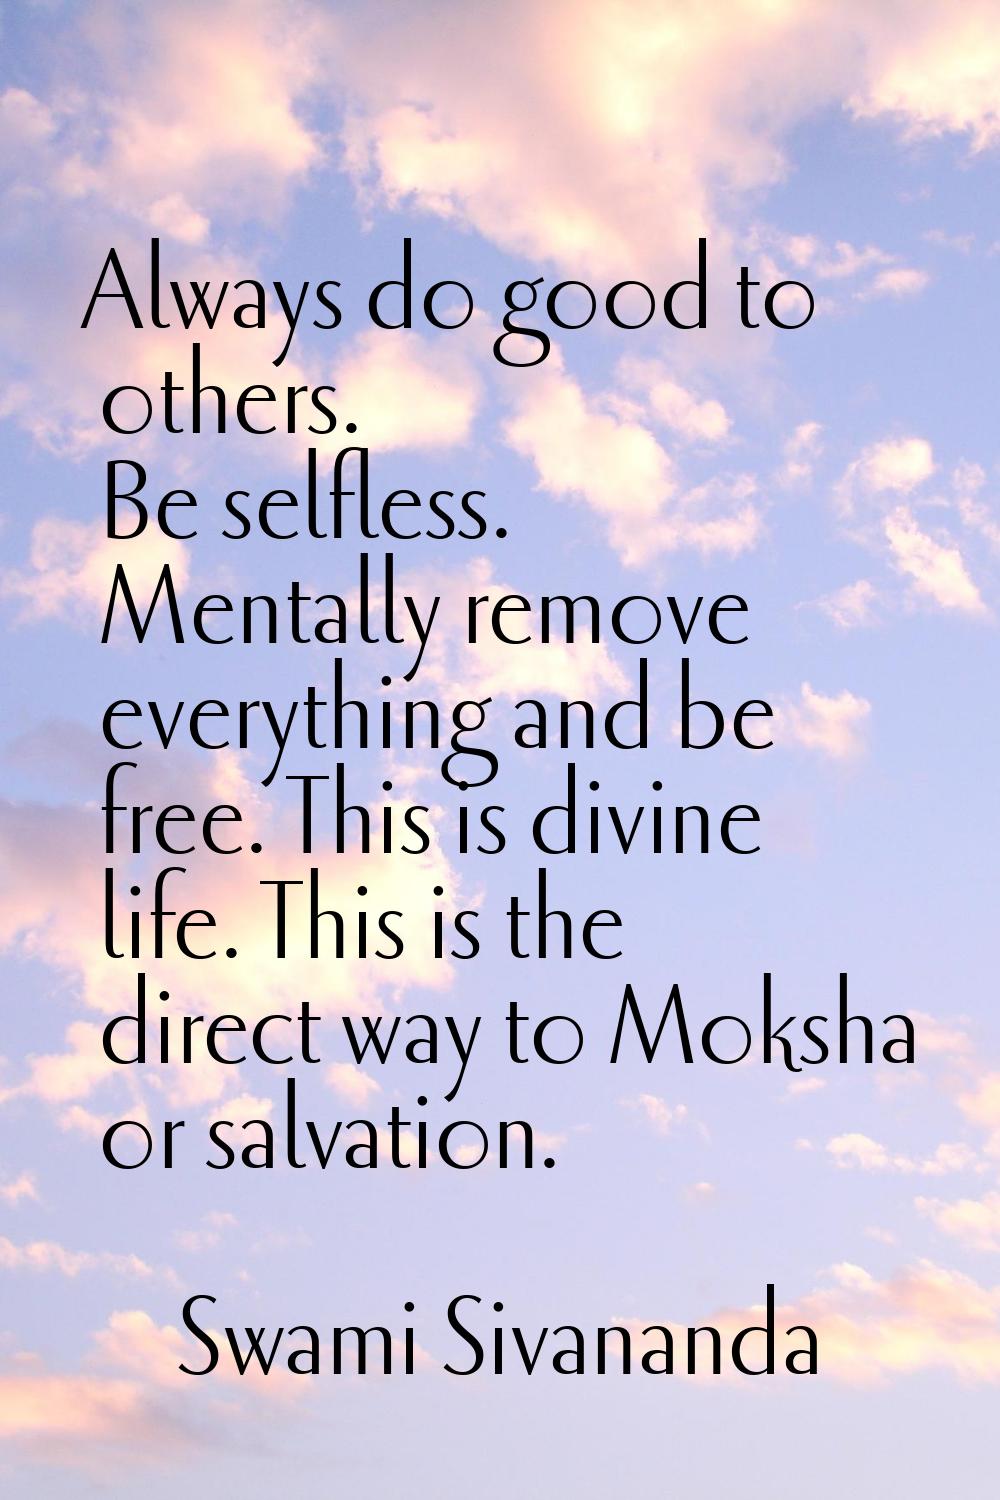 Always do good to others. Be selfless. Mentally remove everything and be free. This is divine life.